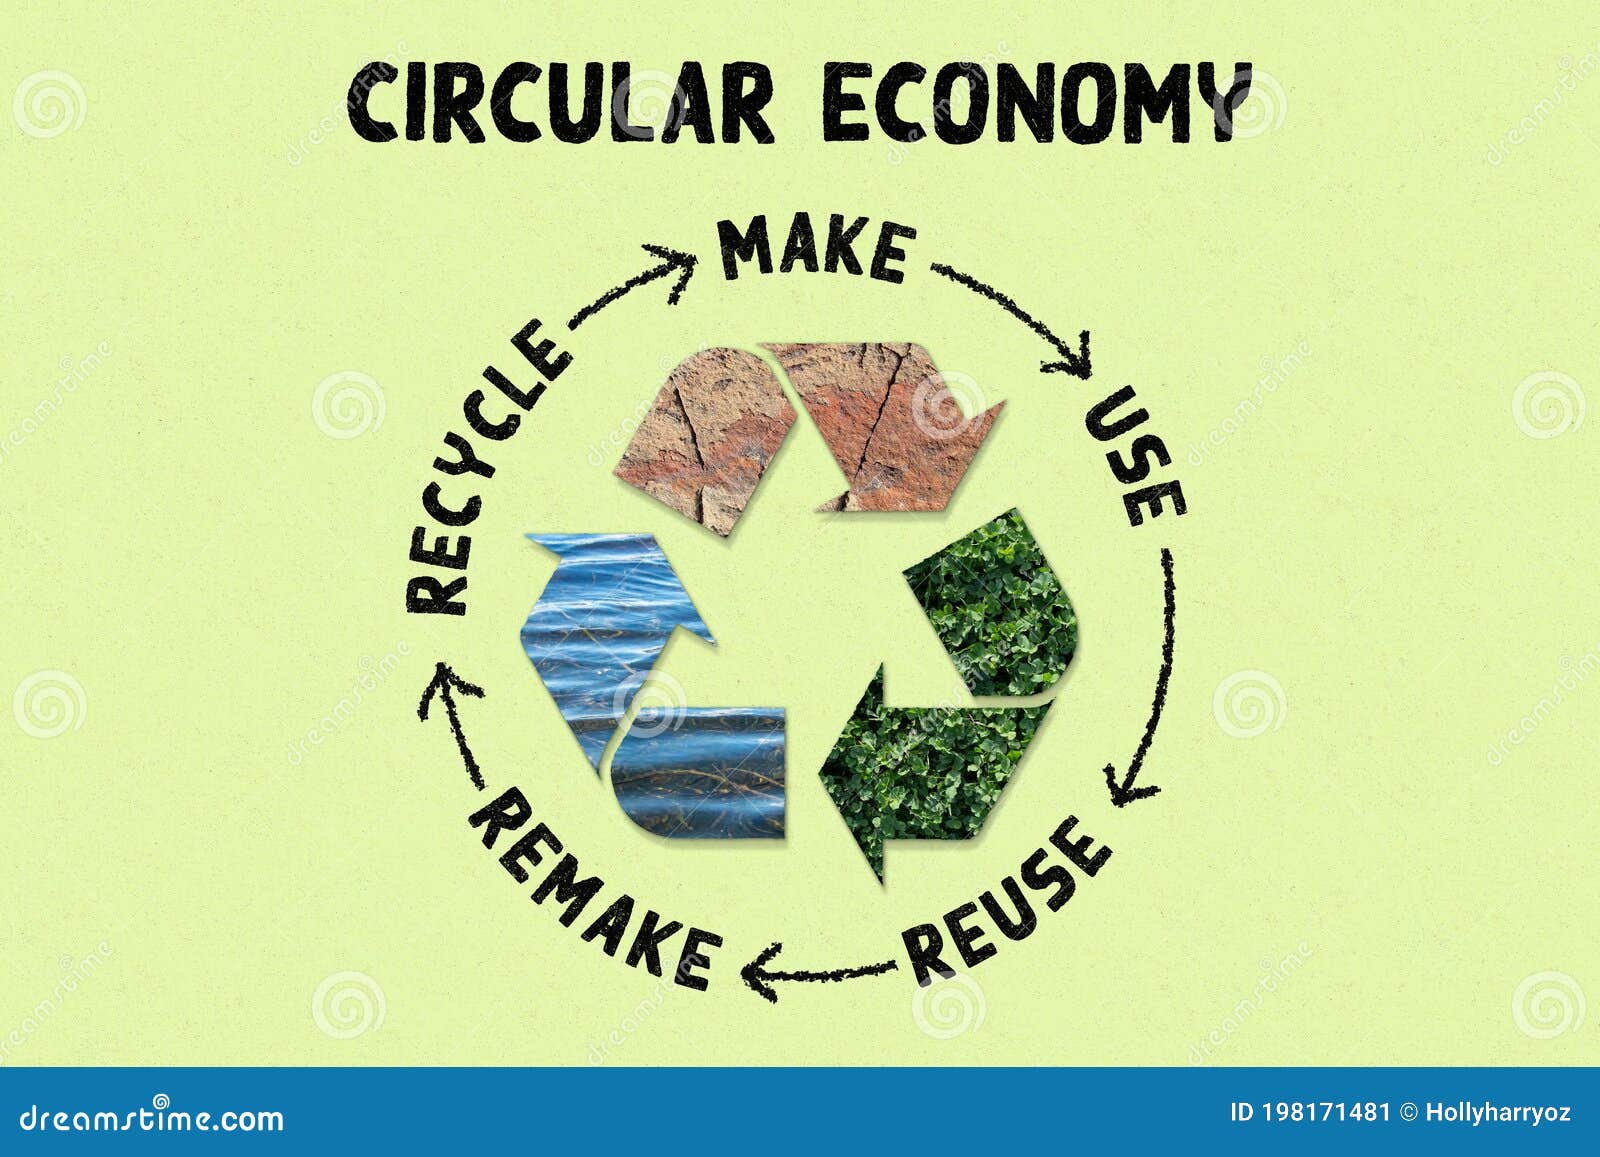 circular economy, make, use, reuse, remake, recycle resources for sustainable consumption